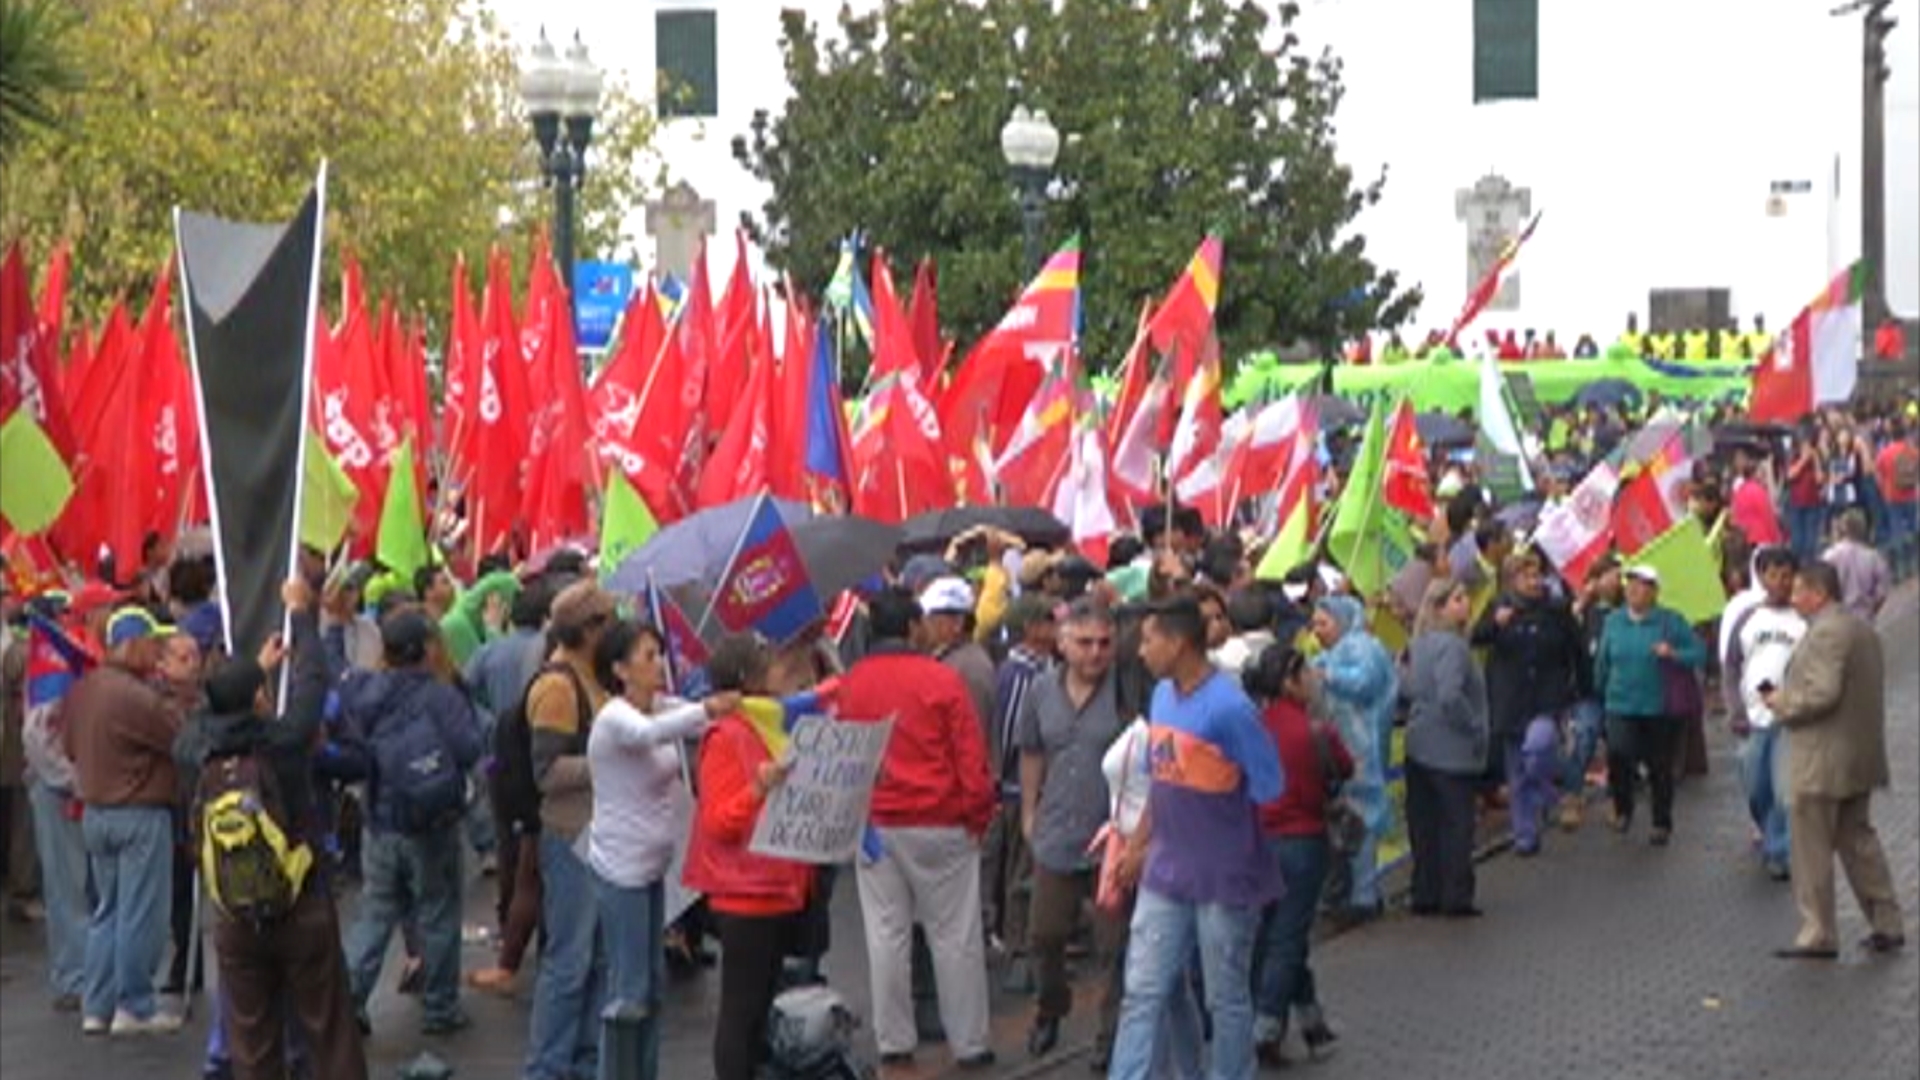 Government supporters held a vigil for democracy in front of the Carondelet presidential palace.